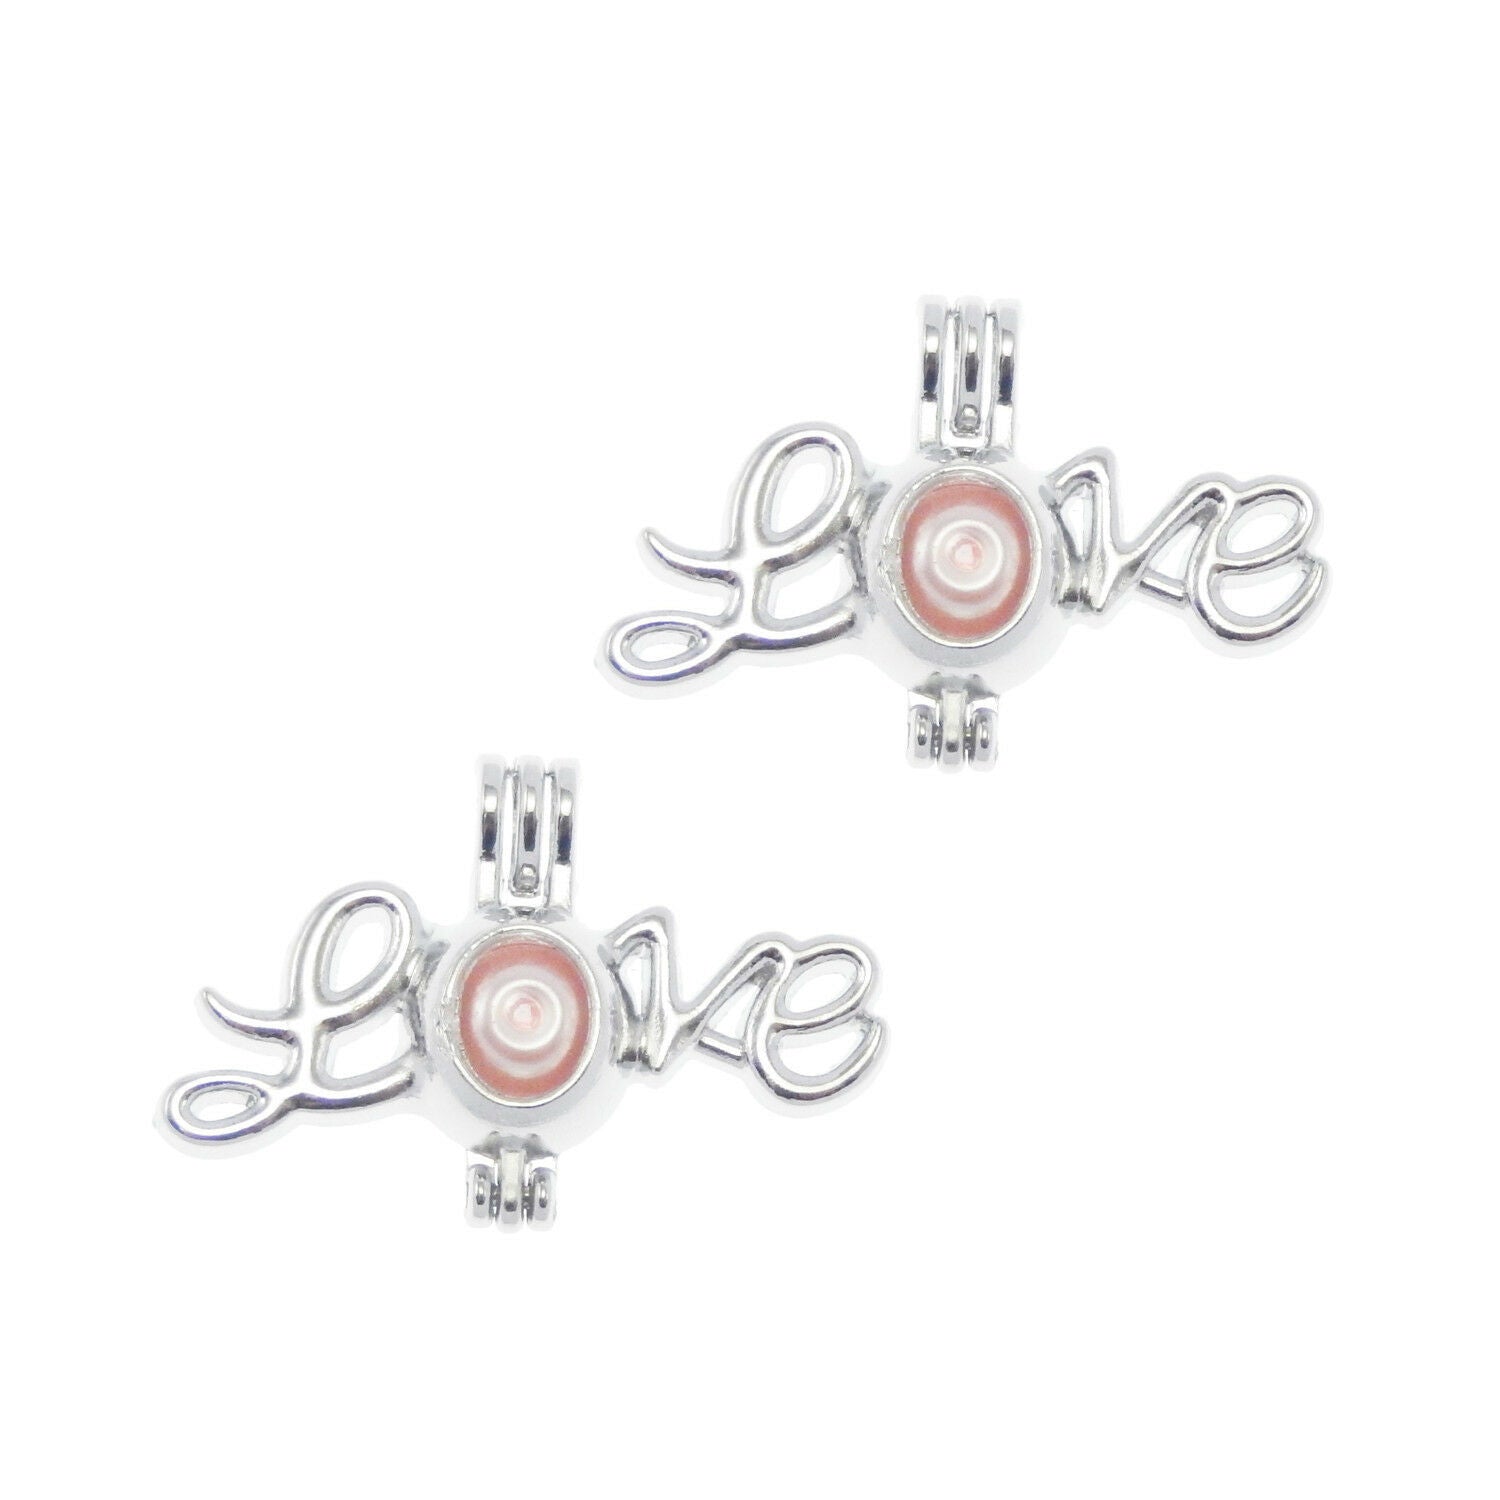 1 Piece White K Plated Alloy Letter "Love" Hollow Locket Charms Pendants Jewelry